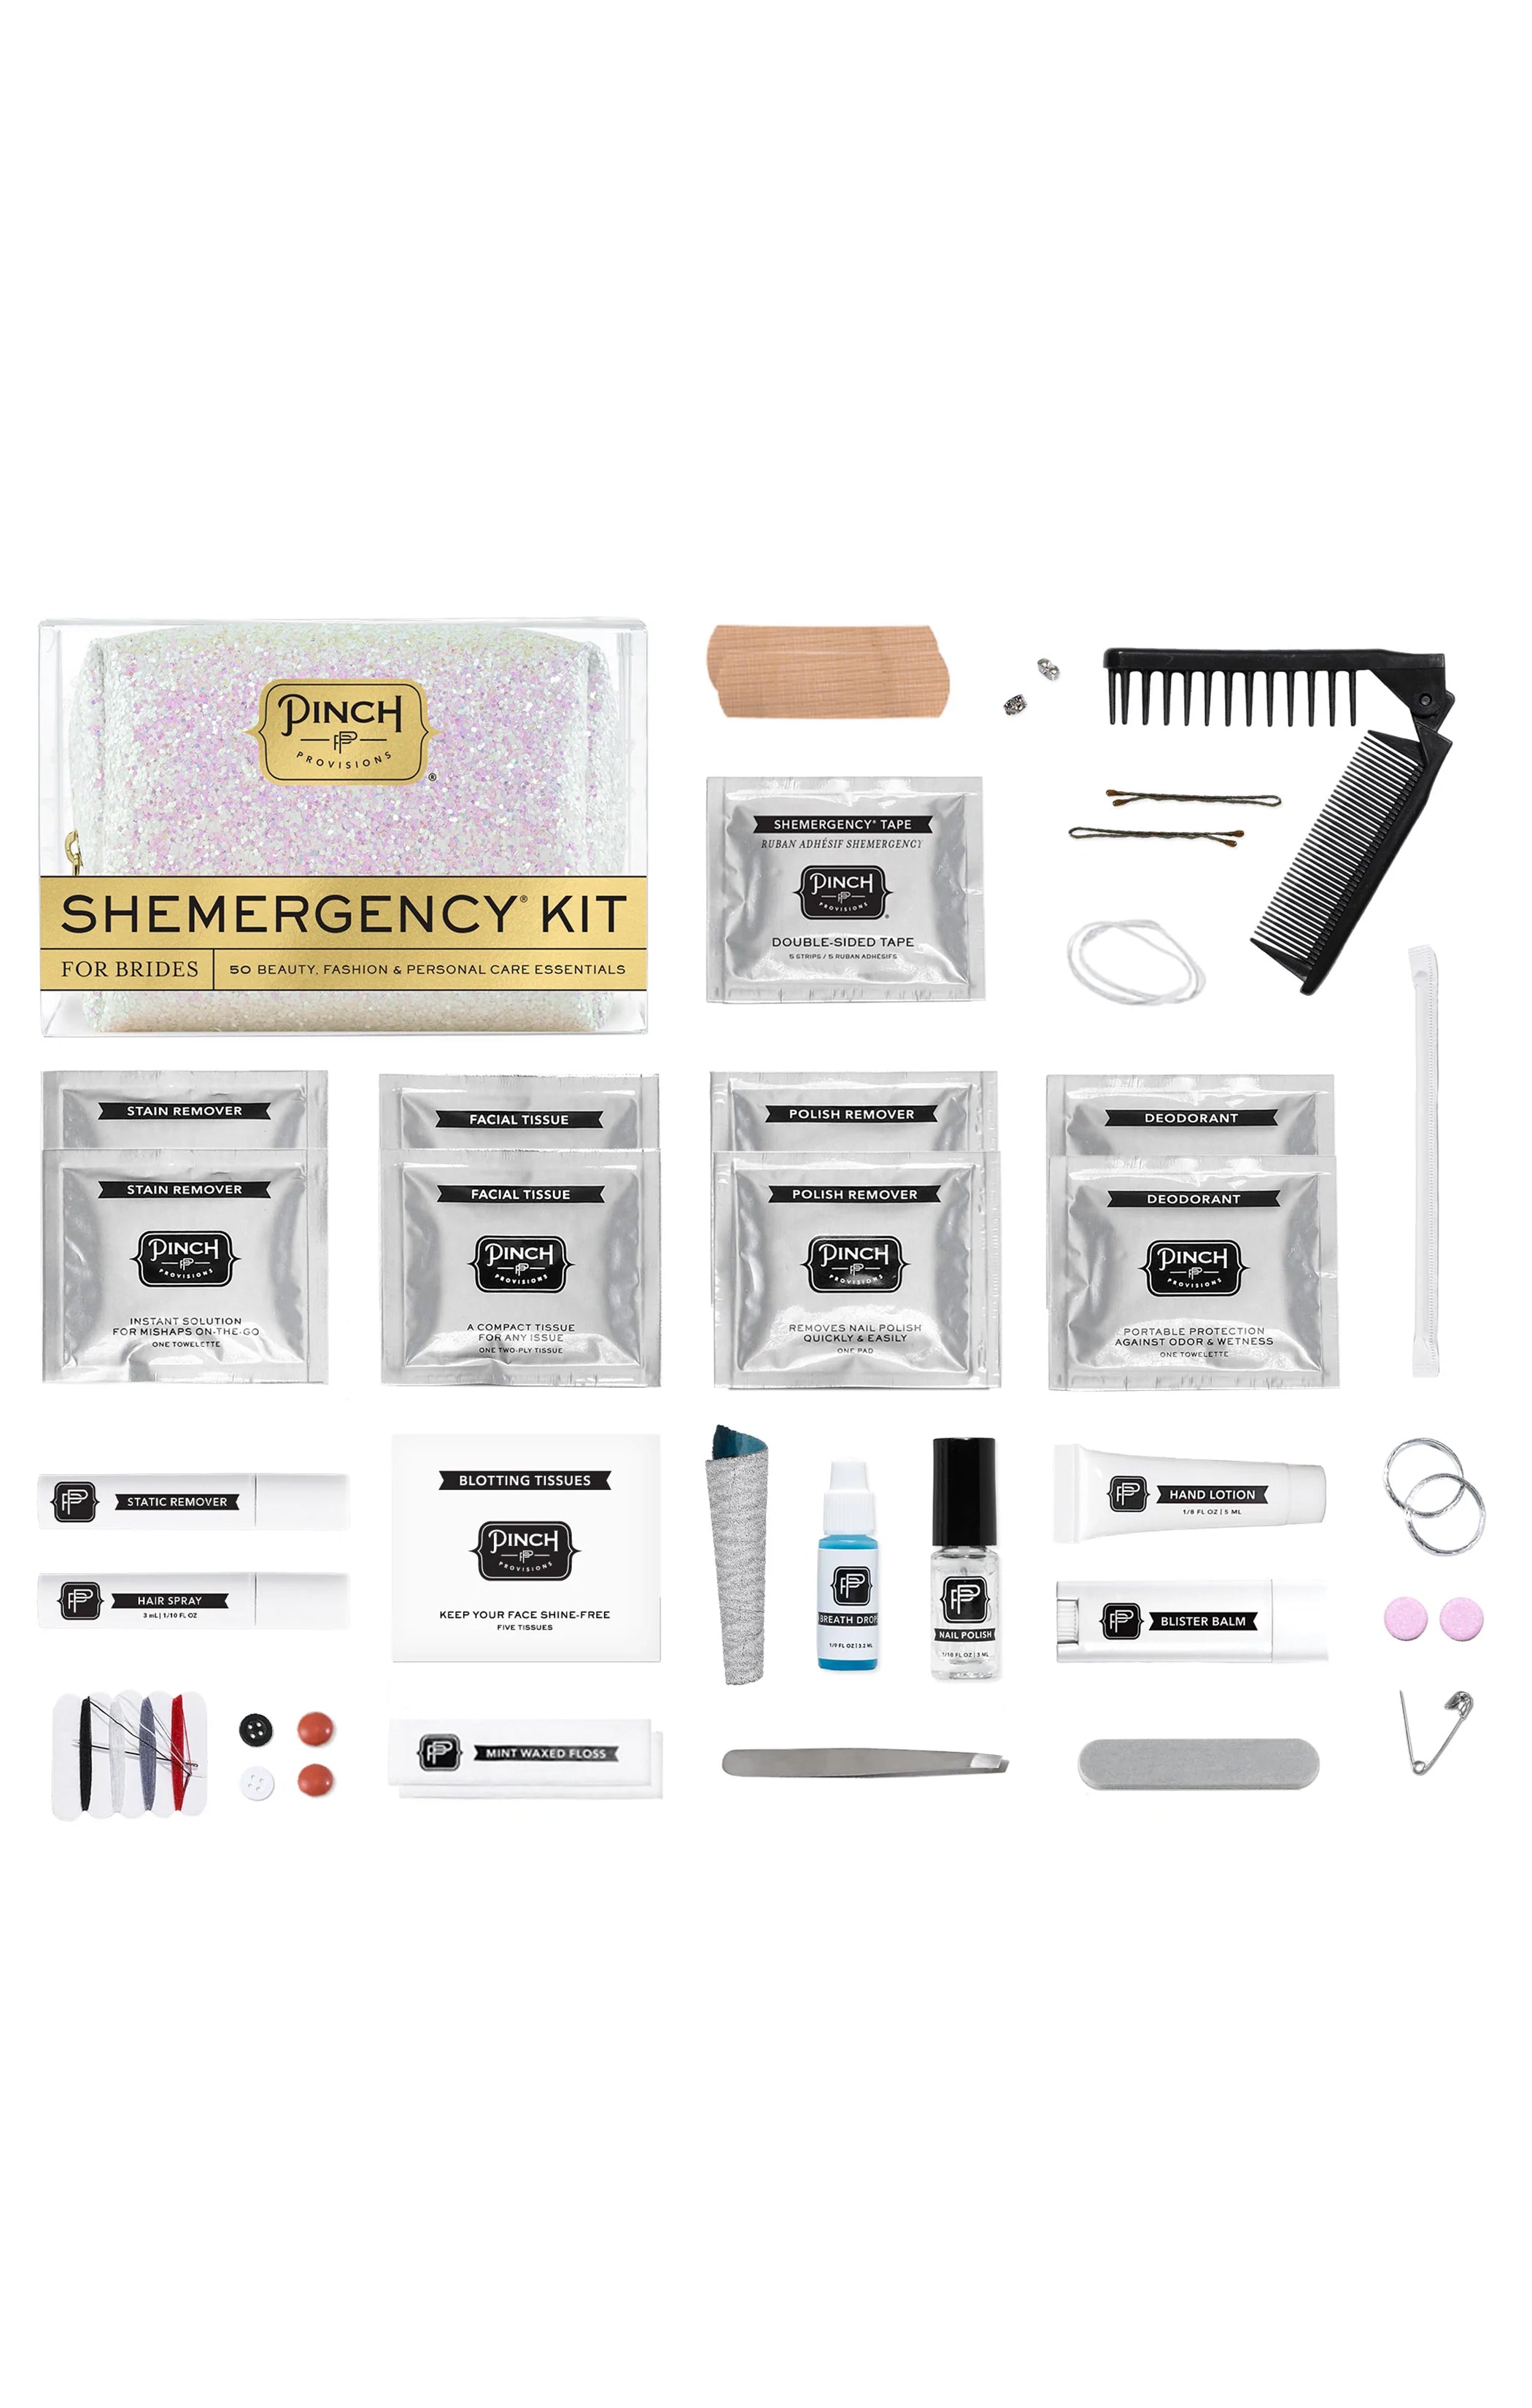 Pinch Provisions Shemergency Survival Kit for Brides ~ Iridescent – Show Me  Your Mumu